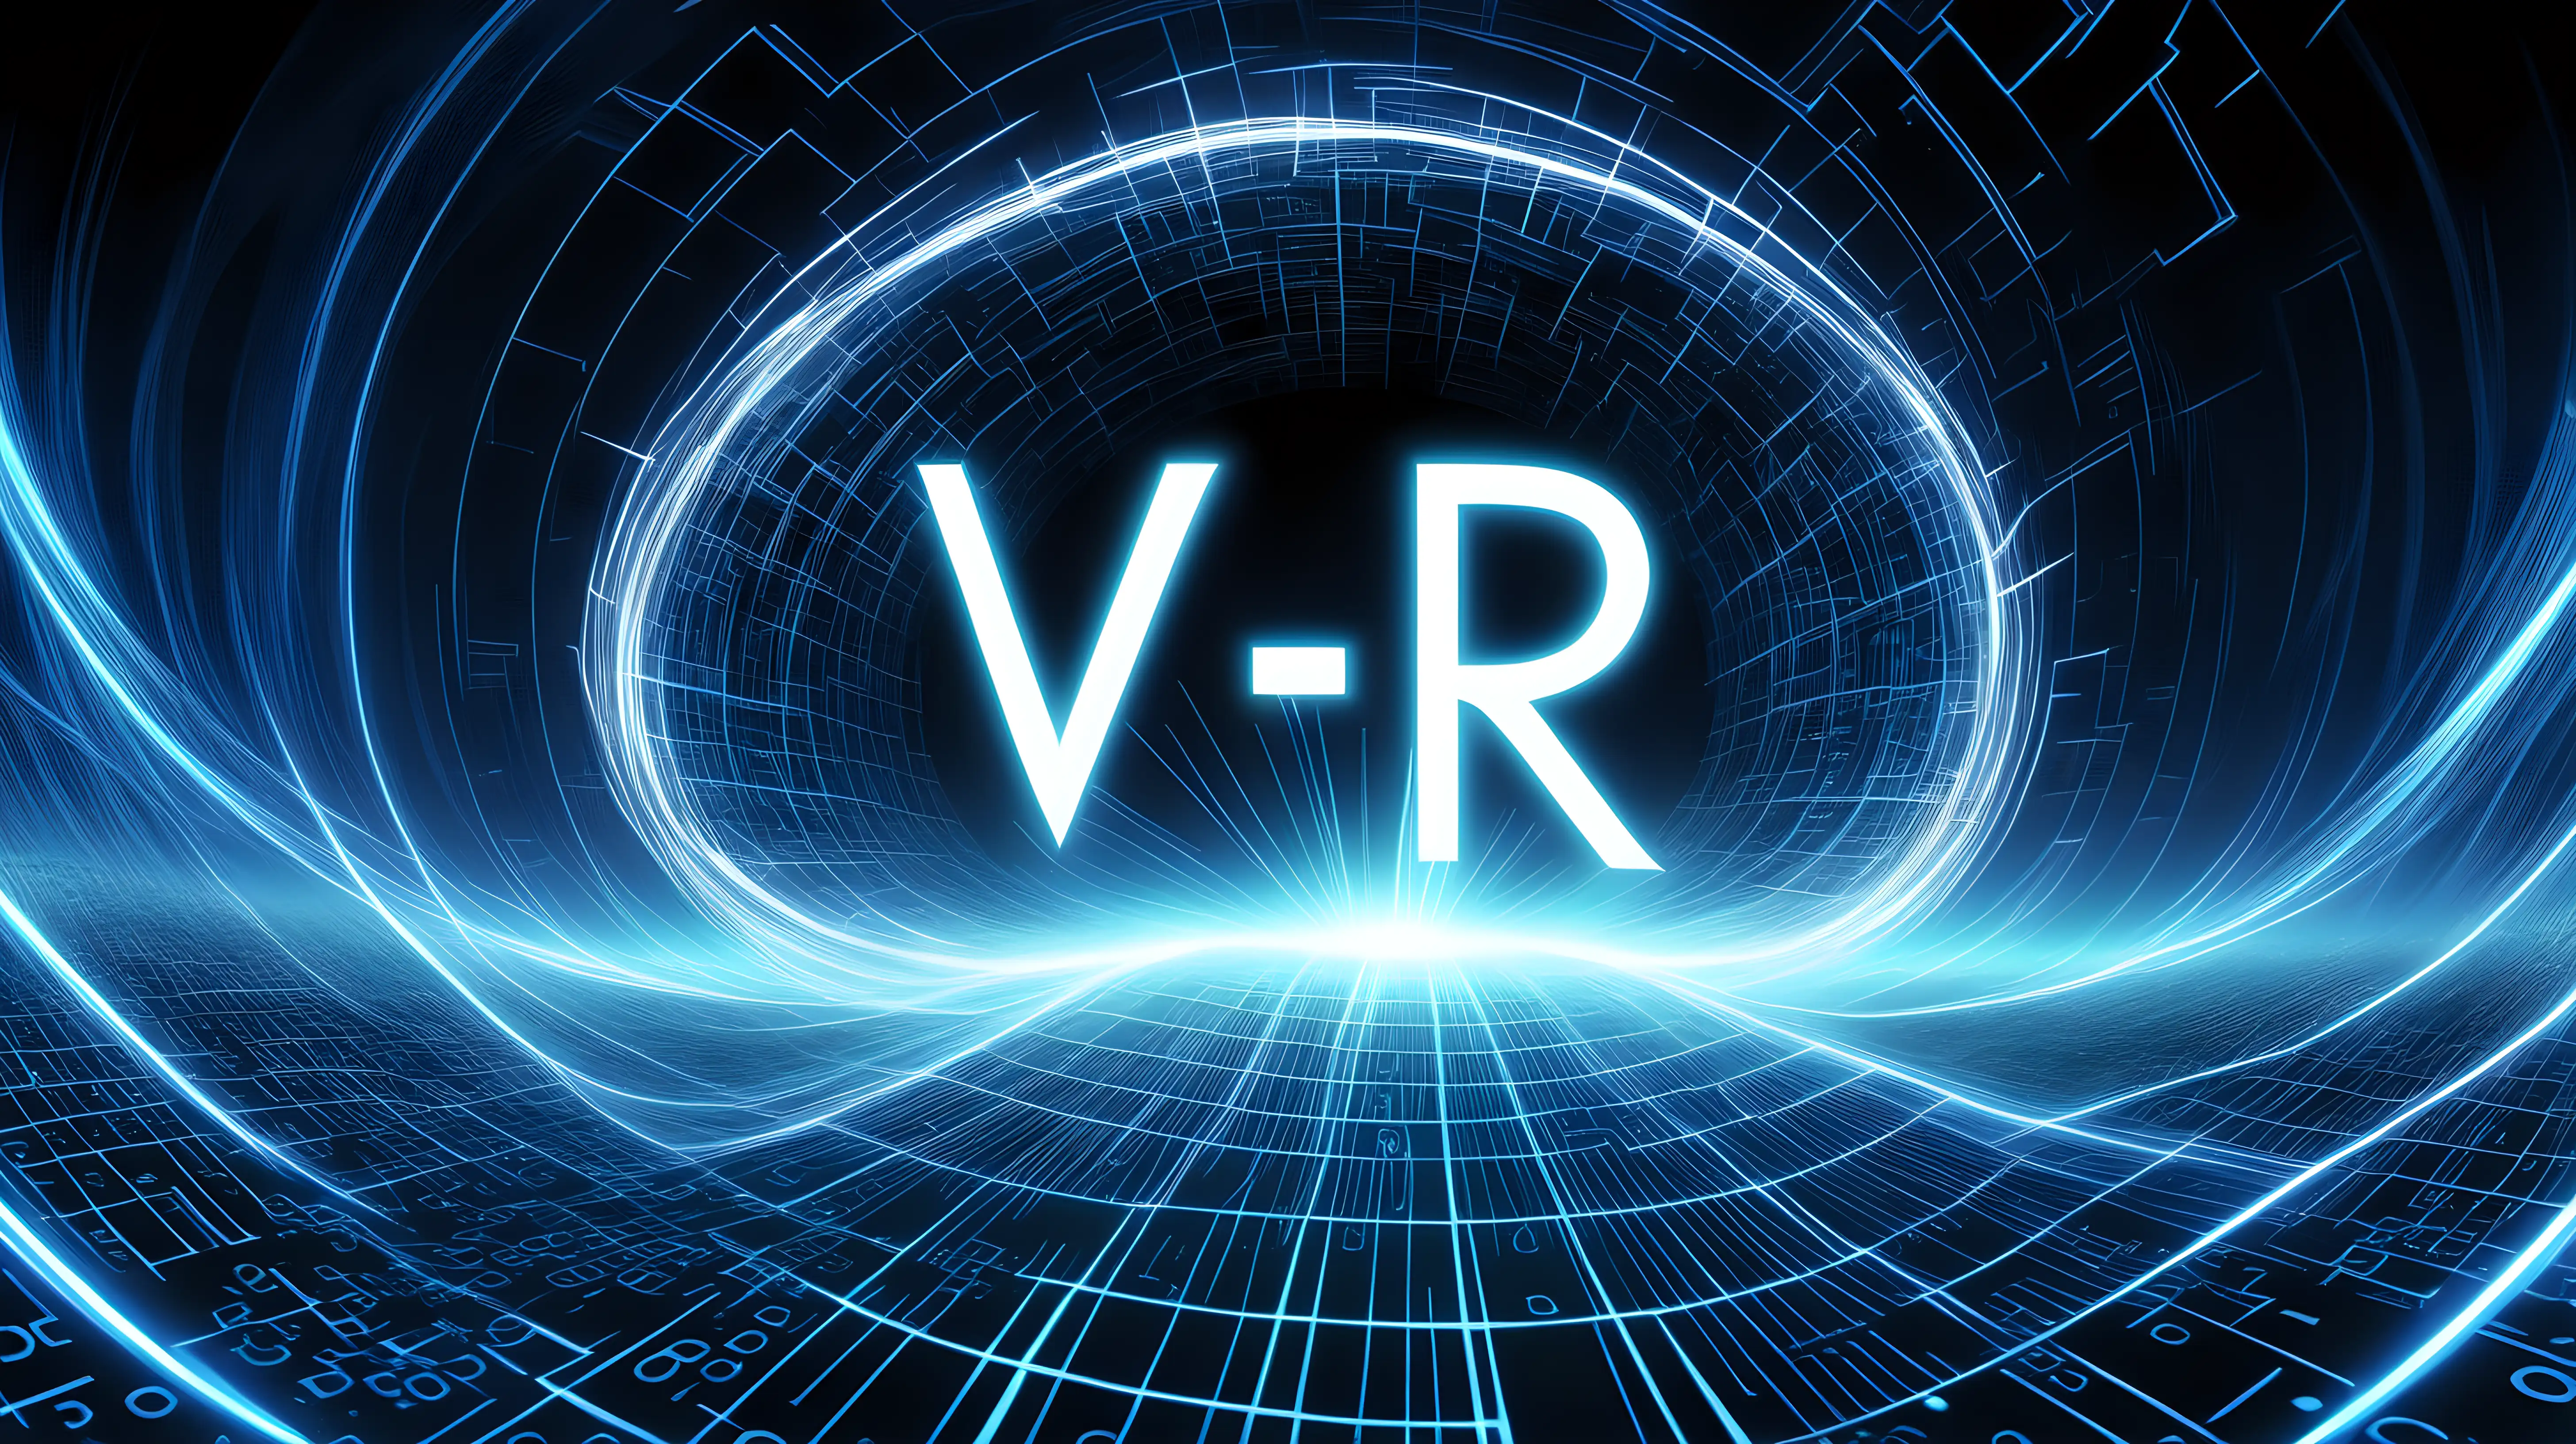 An abstract image featuring "VR" encoded in binary digits, surrounded by swirling data streams and glowing energy fields, symbolizing the digital frontier of virtual reality technology.